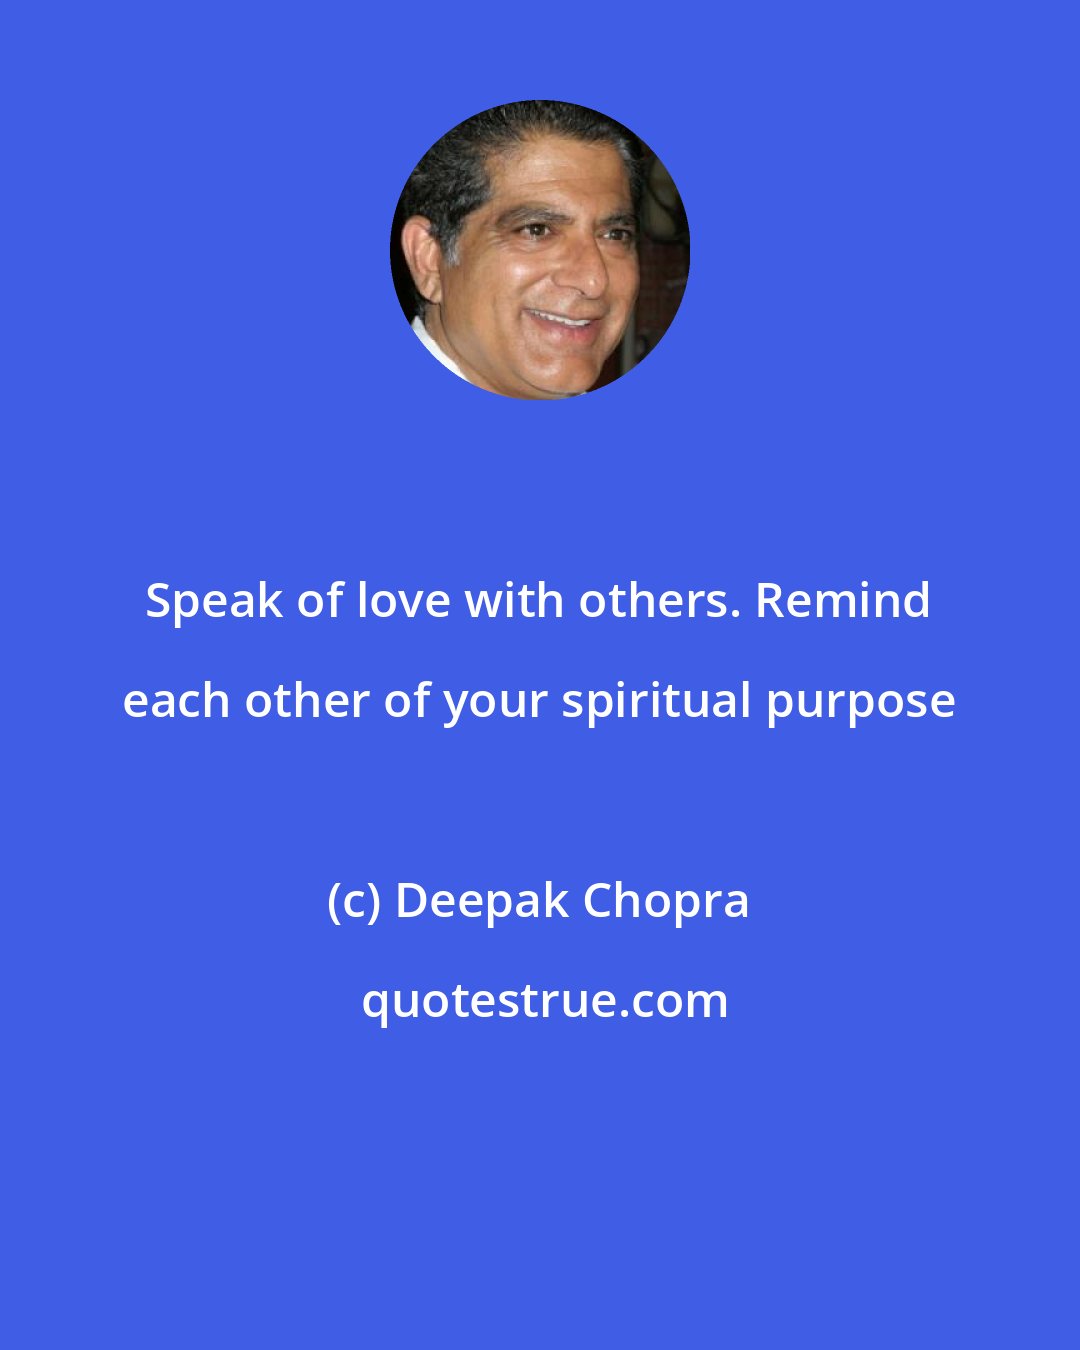 Deepak Chopra: Speak of love with others. Remind each other of your spiritual purpose